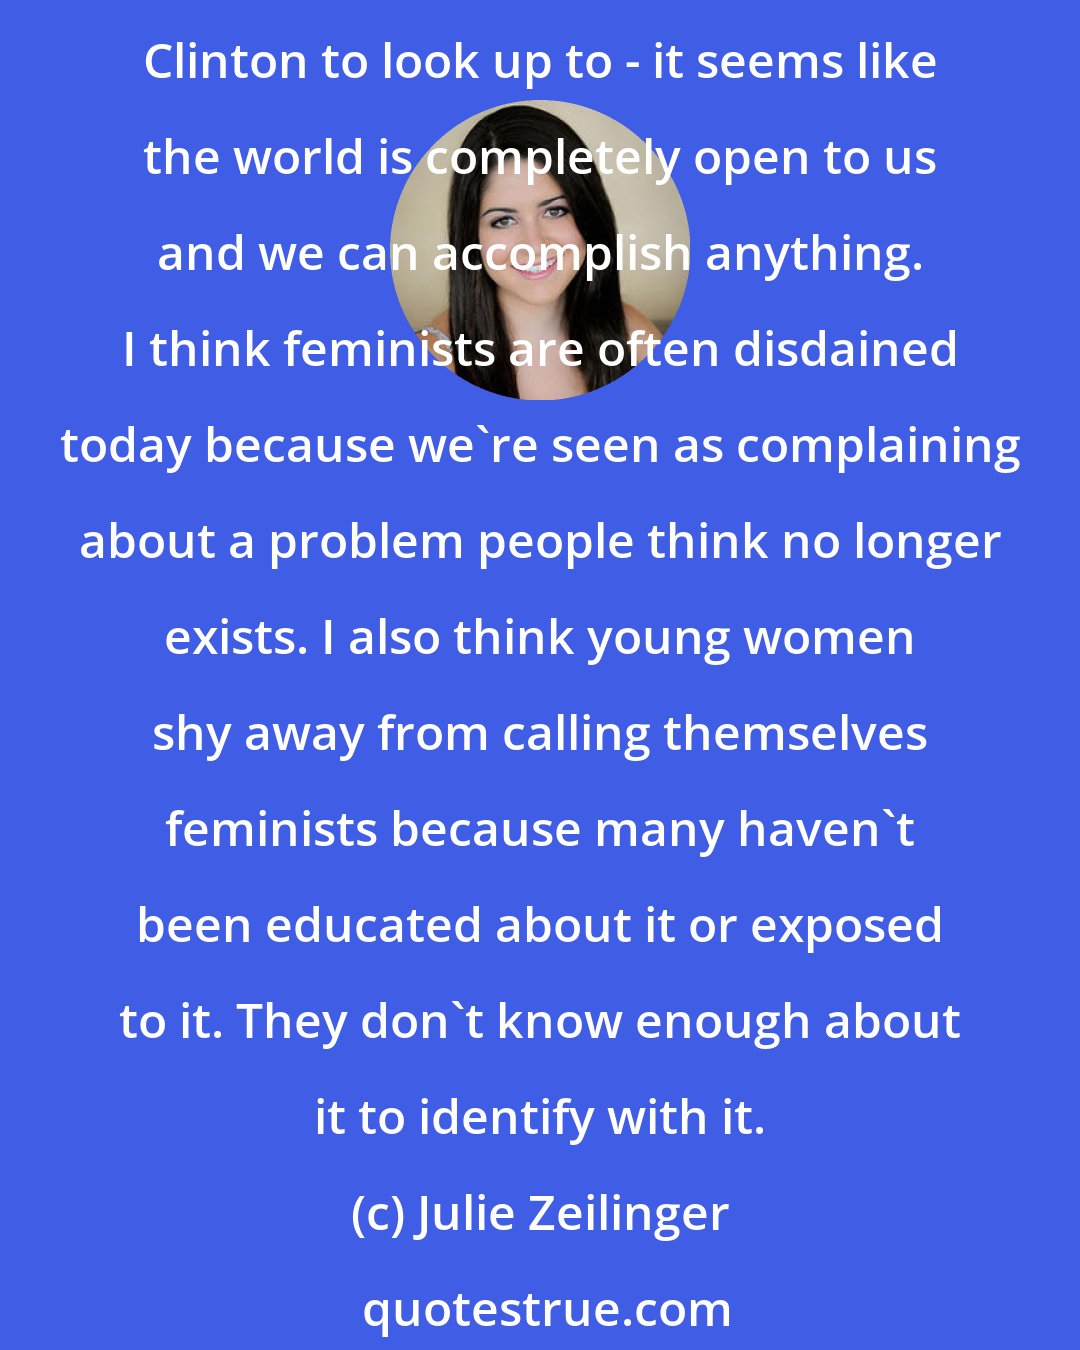 Julie Zeilinger: Now, I think a lot of people look around and feel that we're relatively equal with men. In fact, women are now the majority of college graduates, we have role models like Hillary Clinton to look up to - it seems like the world is completely open to us and we can accomplish anything. I think feminists are often disdained today because we're seen as complaining about a problem people think no longer exists. I also think young women shy away from calling themselves feminists because many haven't been educated about it or exposed to it. They don't know enough about it to identify with it.